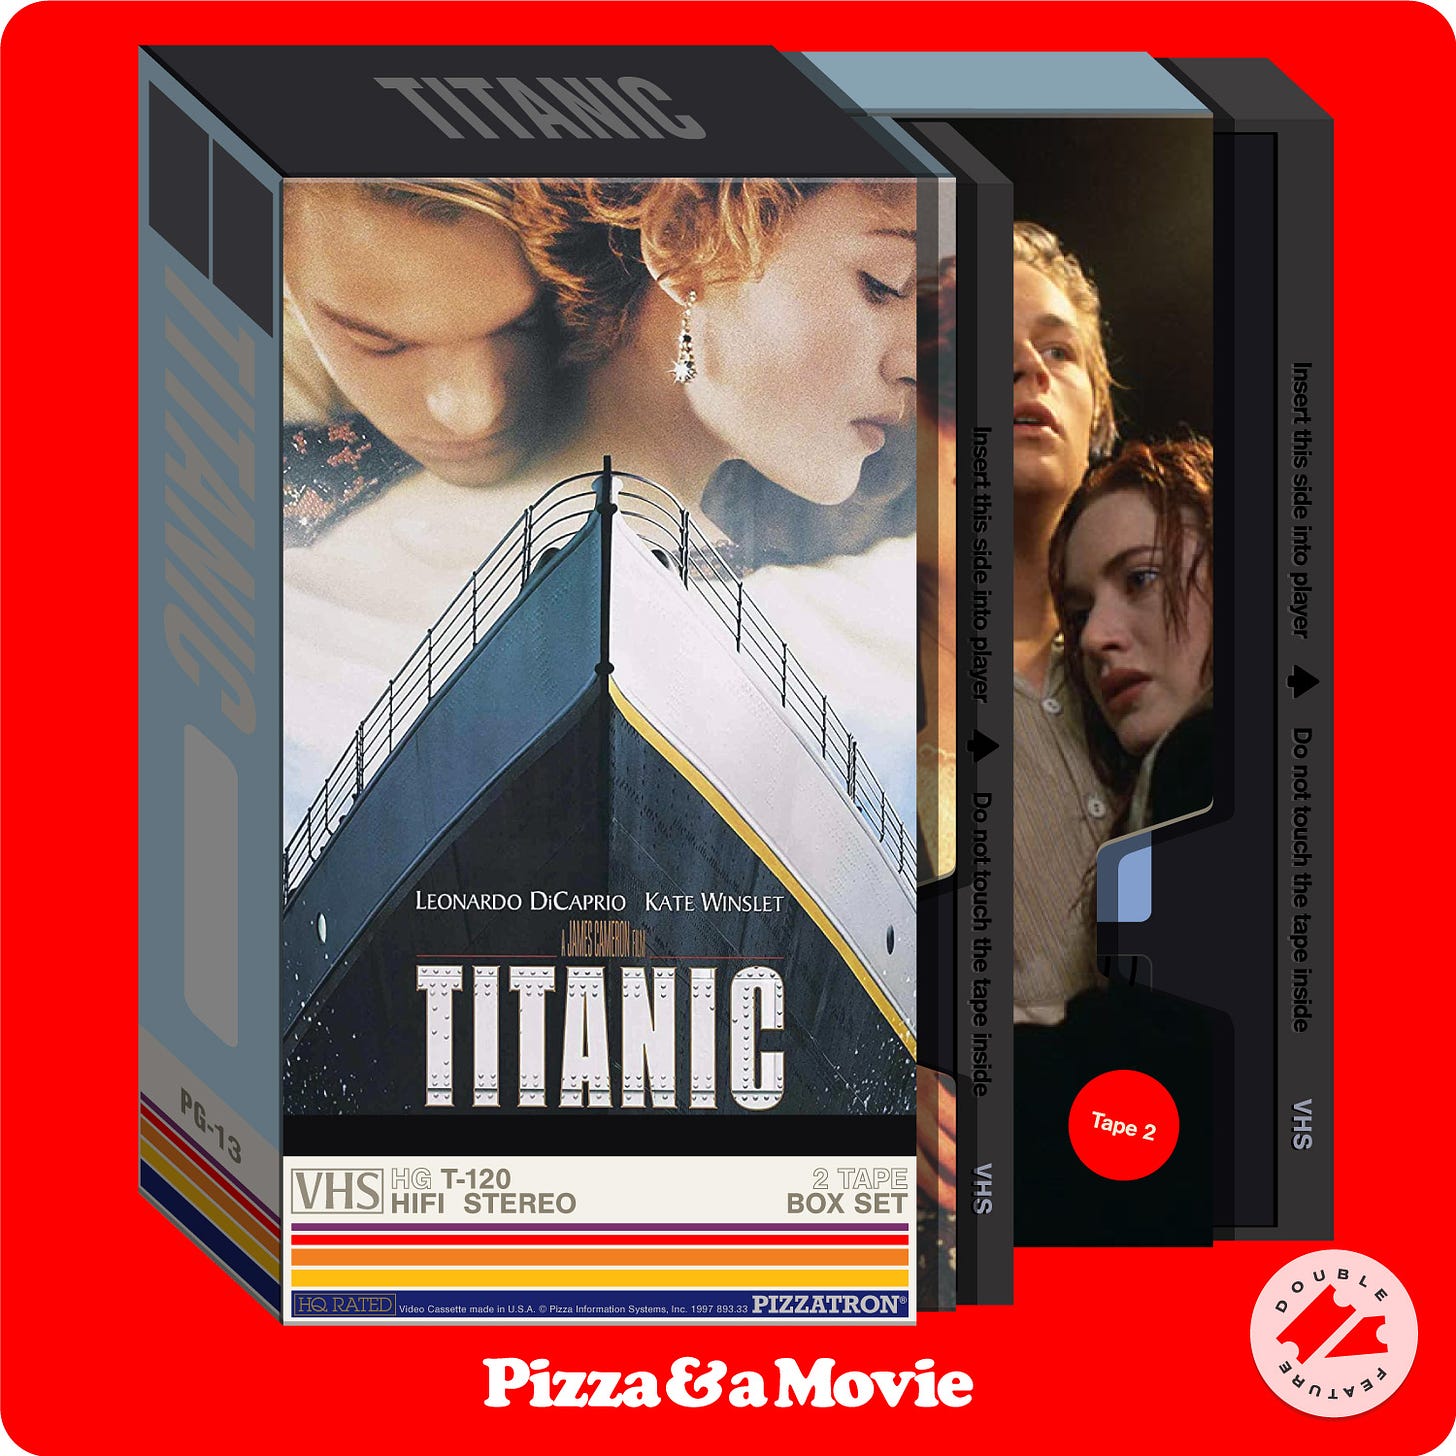 Valentine's Day: Titanic 4K in 3D brings back the magic (review)